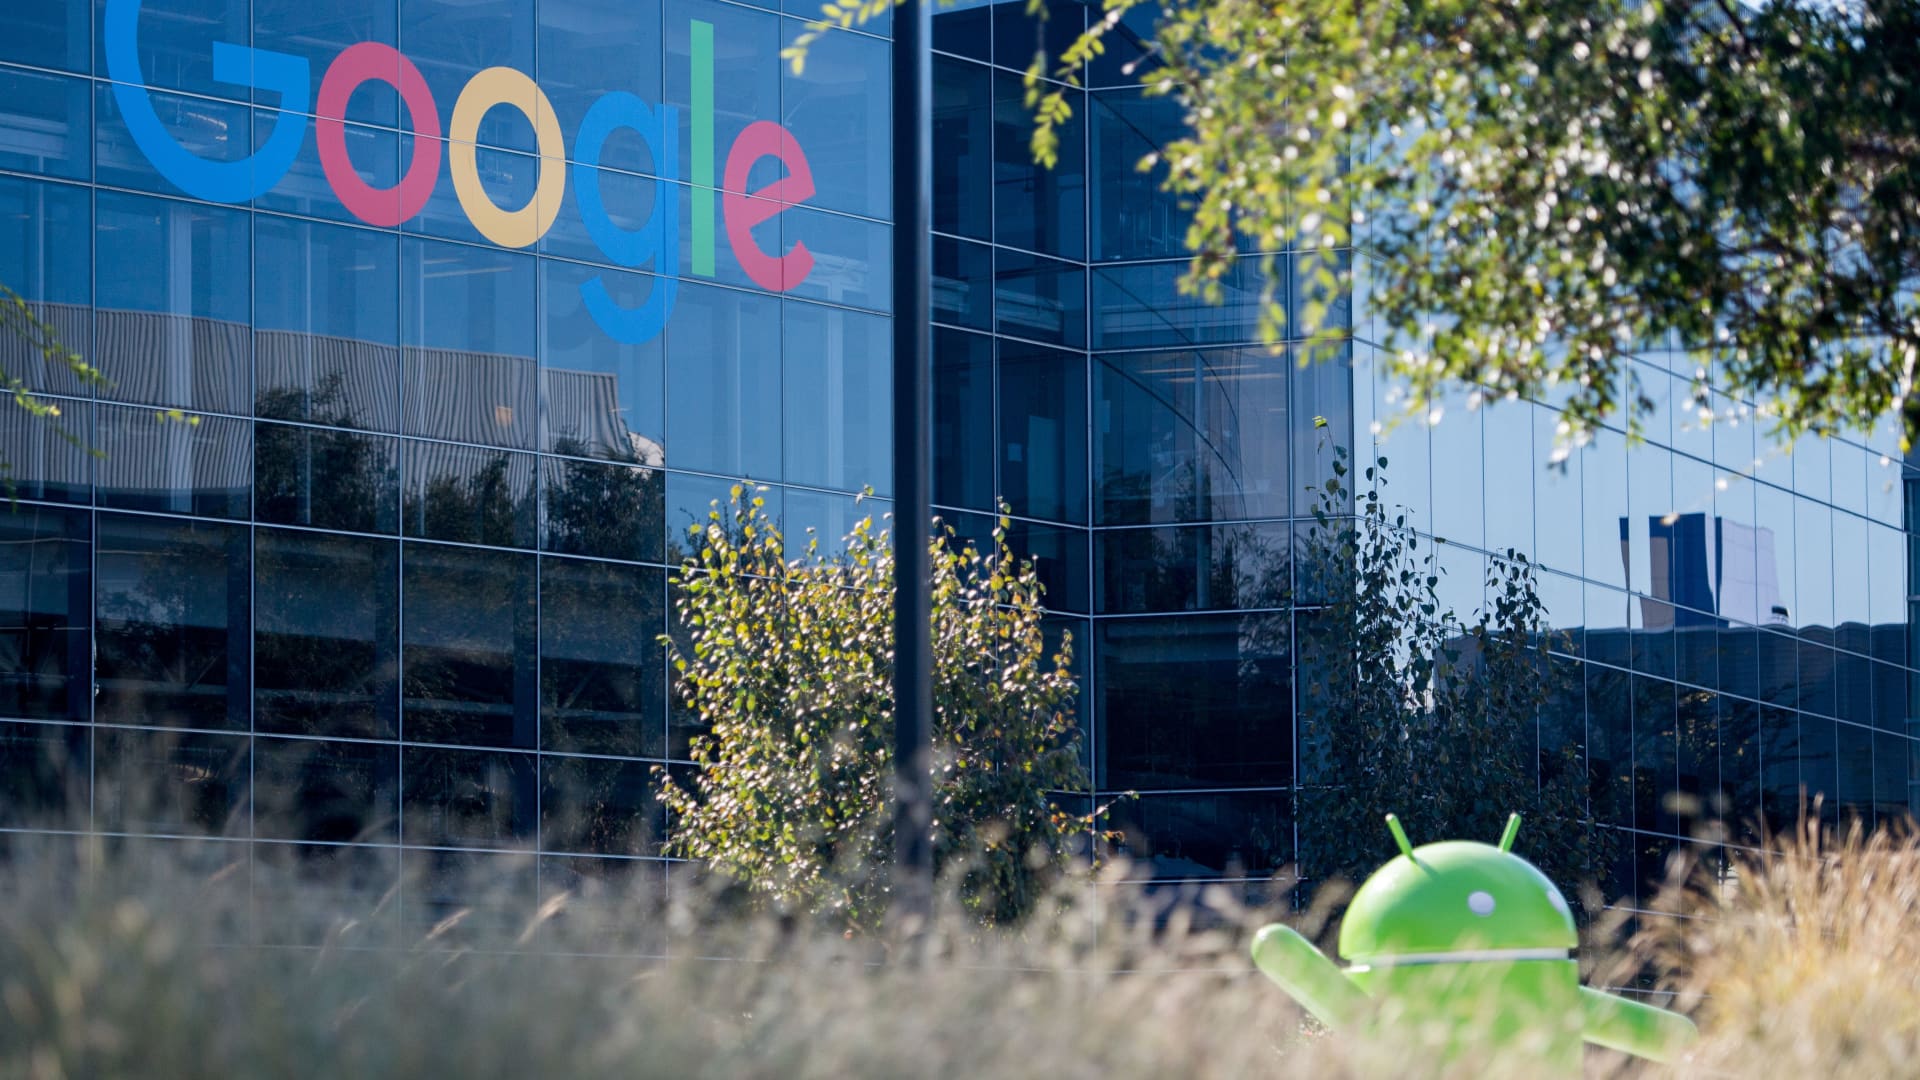 Google employees frustrated after office Covid outbreaks, some call to modify vaccine policy